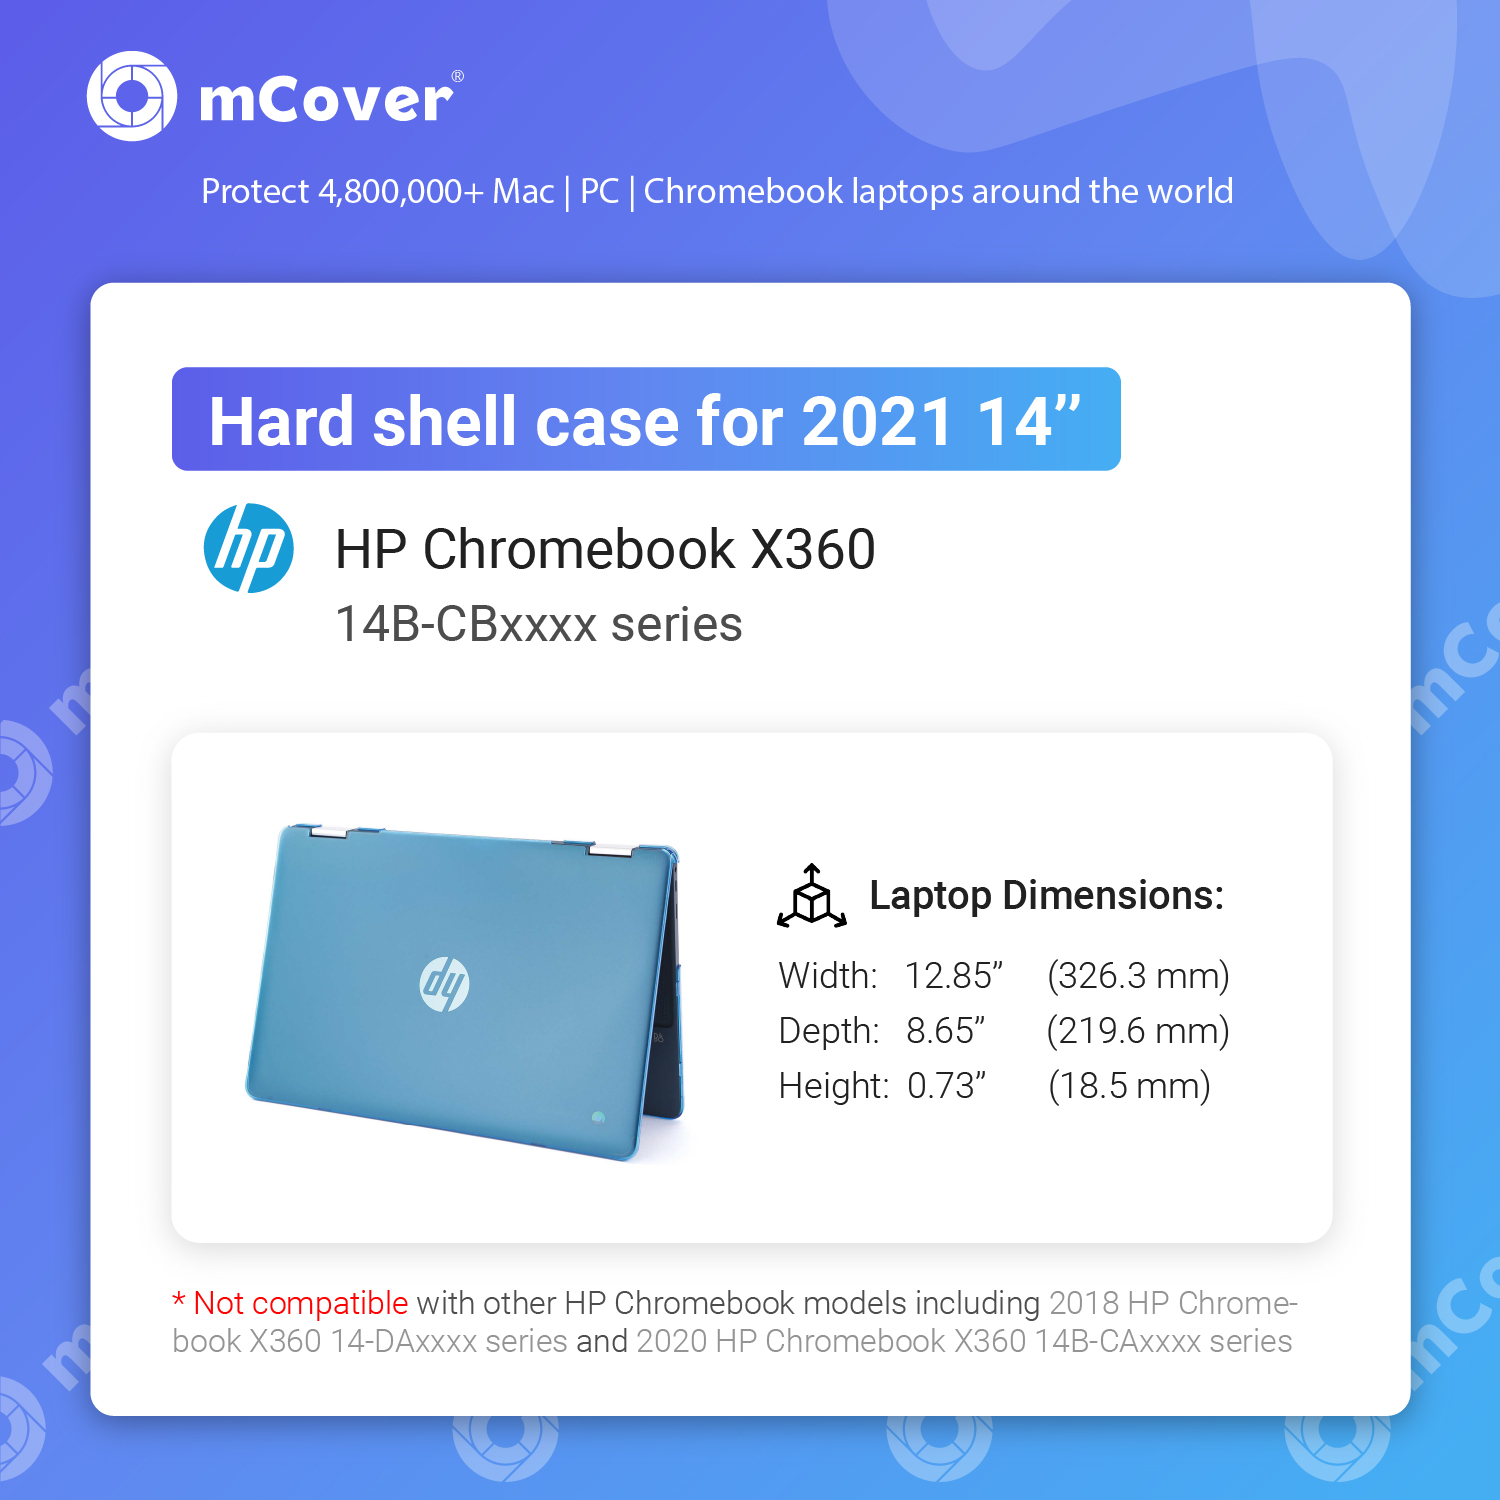 mCover Hard Shell case for 14-inch HP Chromebook X360
14b-CB series